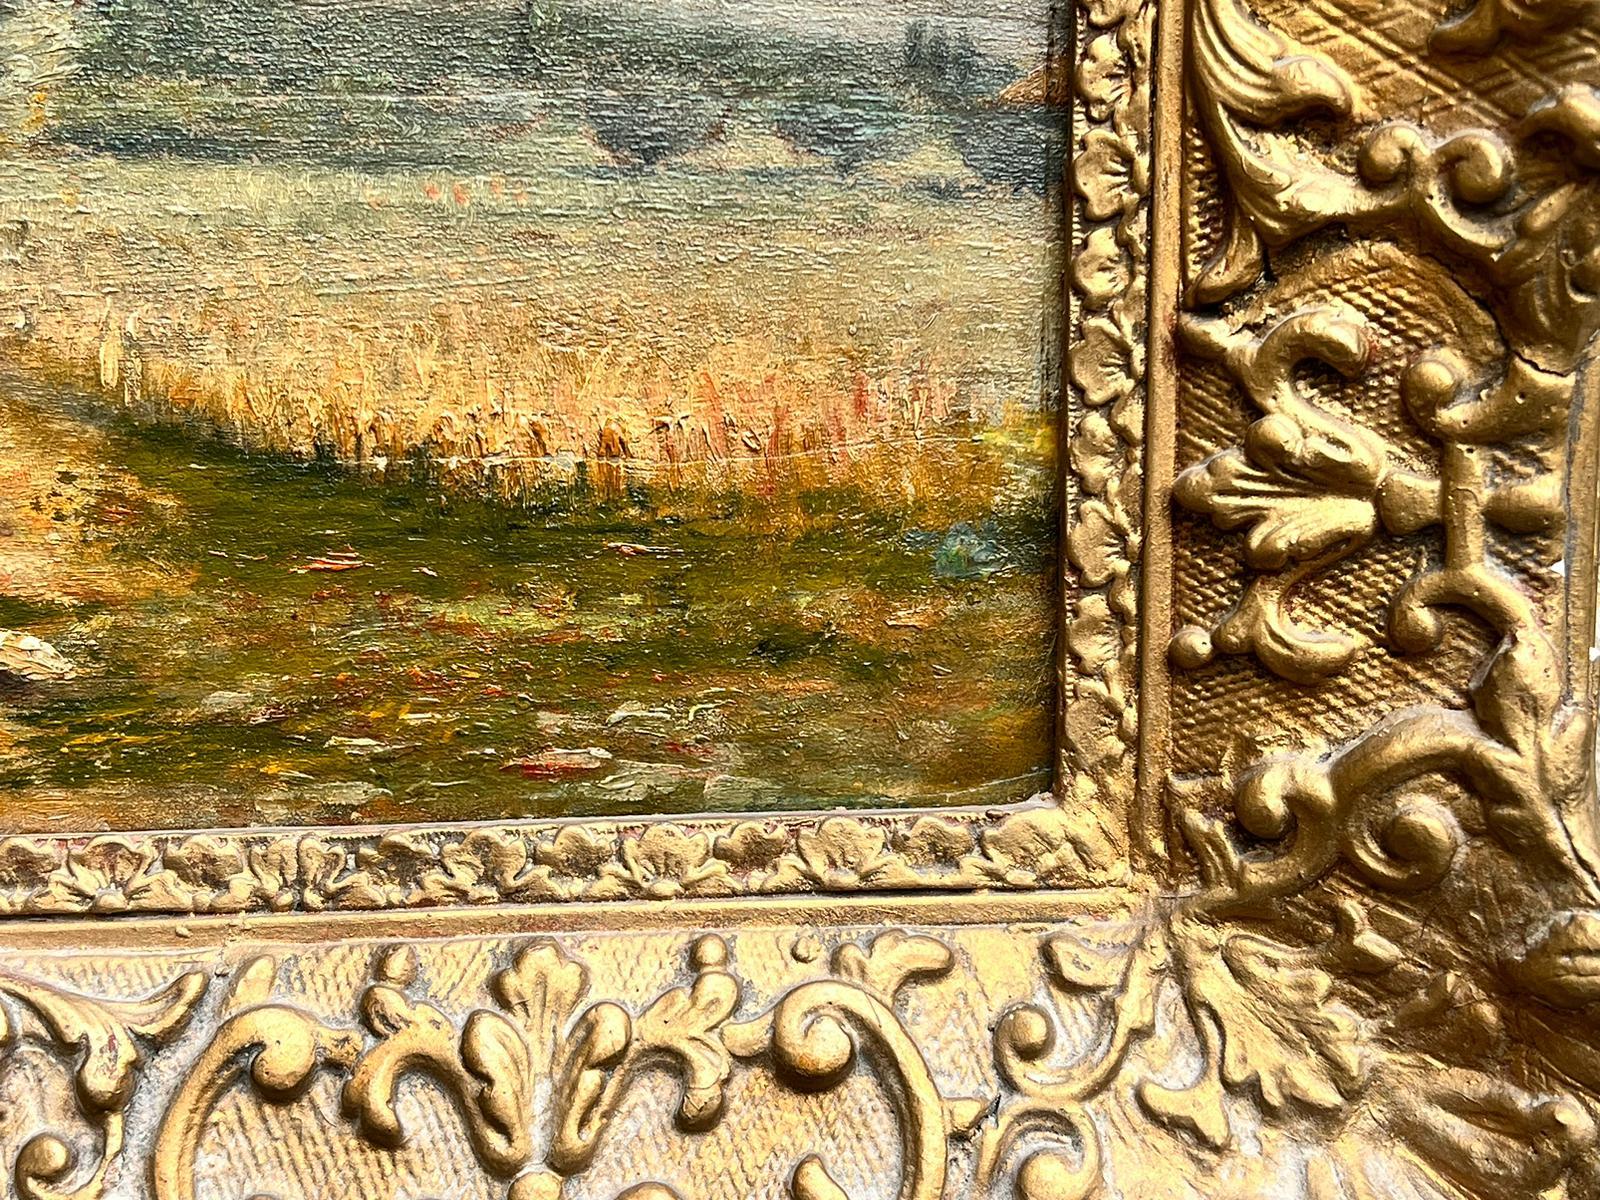 Golden Light in Provence
French Impressionist School, late 19th/ early 20th century
indistinctly signed lower corner
oil painting on board, framed
framed: 18 x 14 inches
board: 9.5 x 13 inches
provenance: private collection, Provence
condition: very